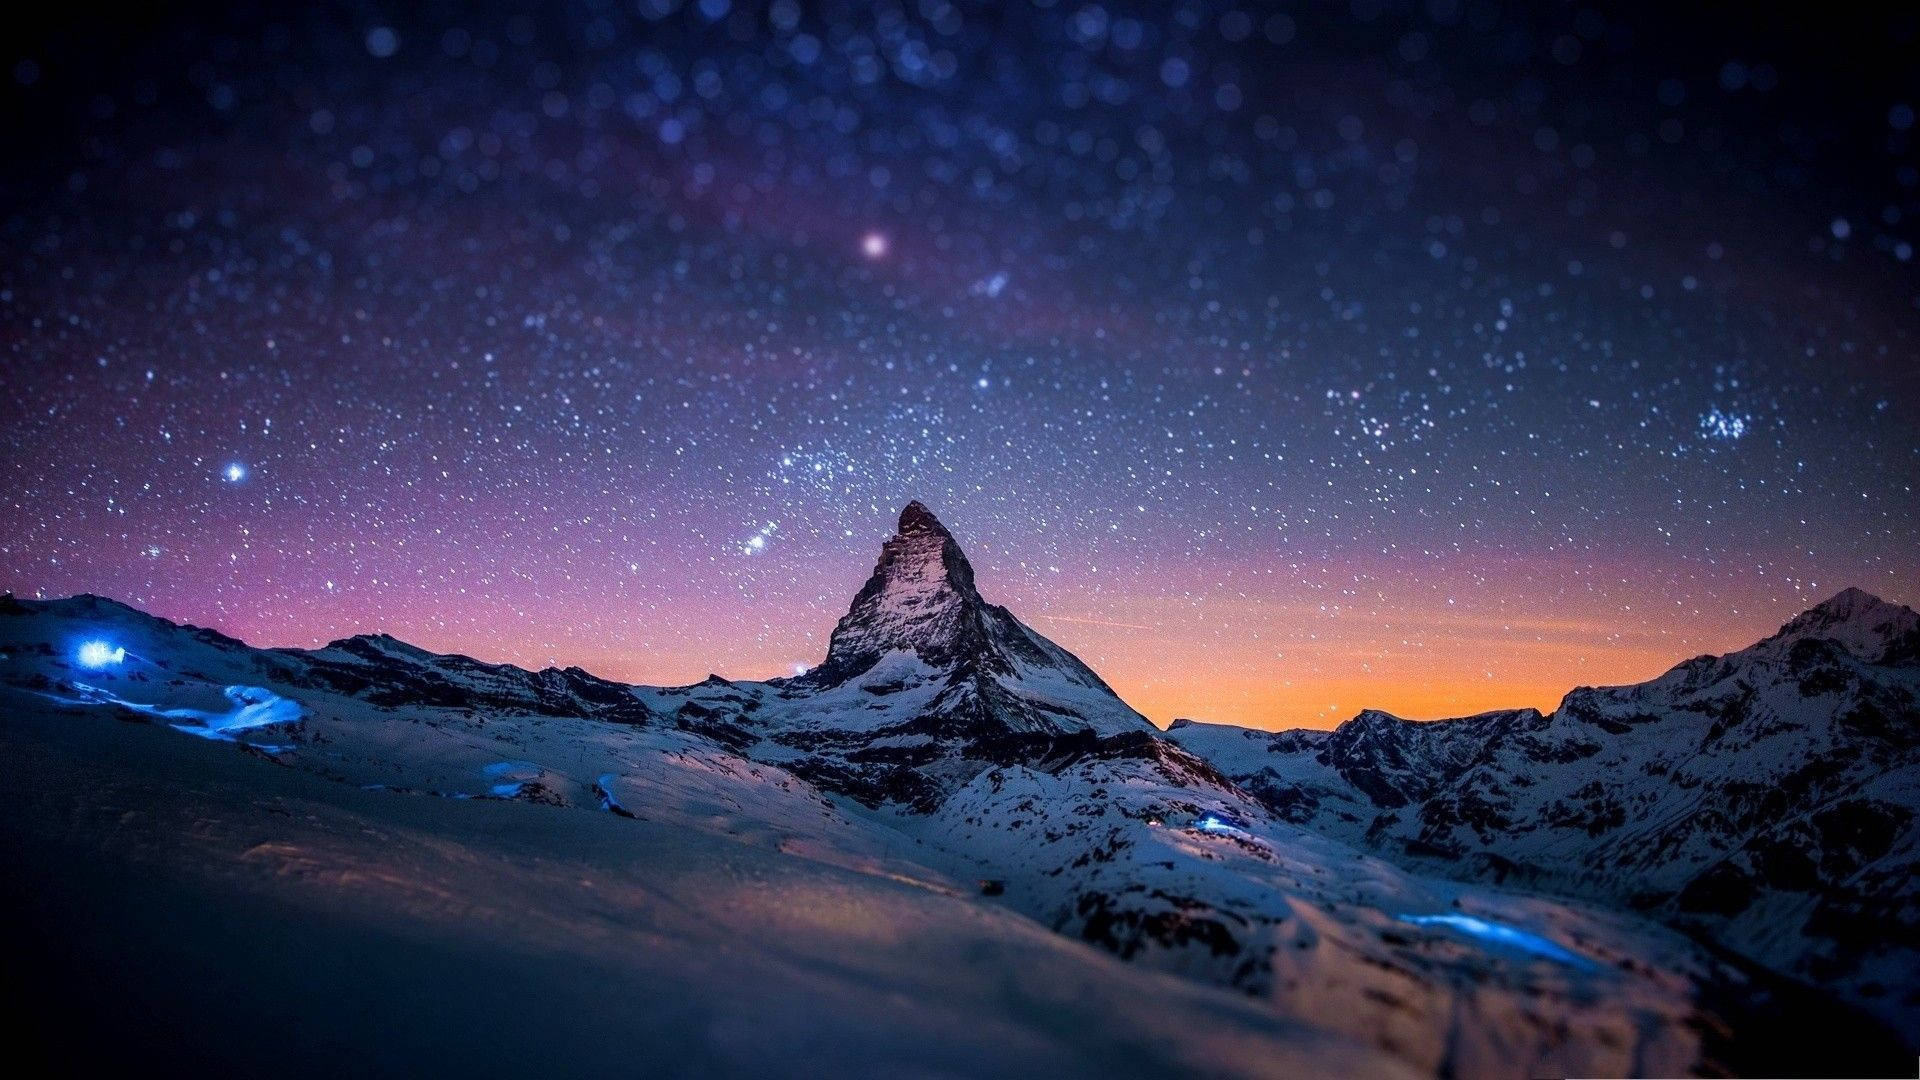 Windows Winter On Mountains And Starry Sky